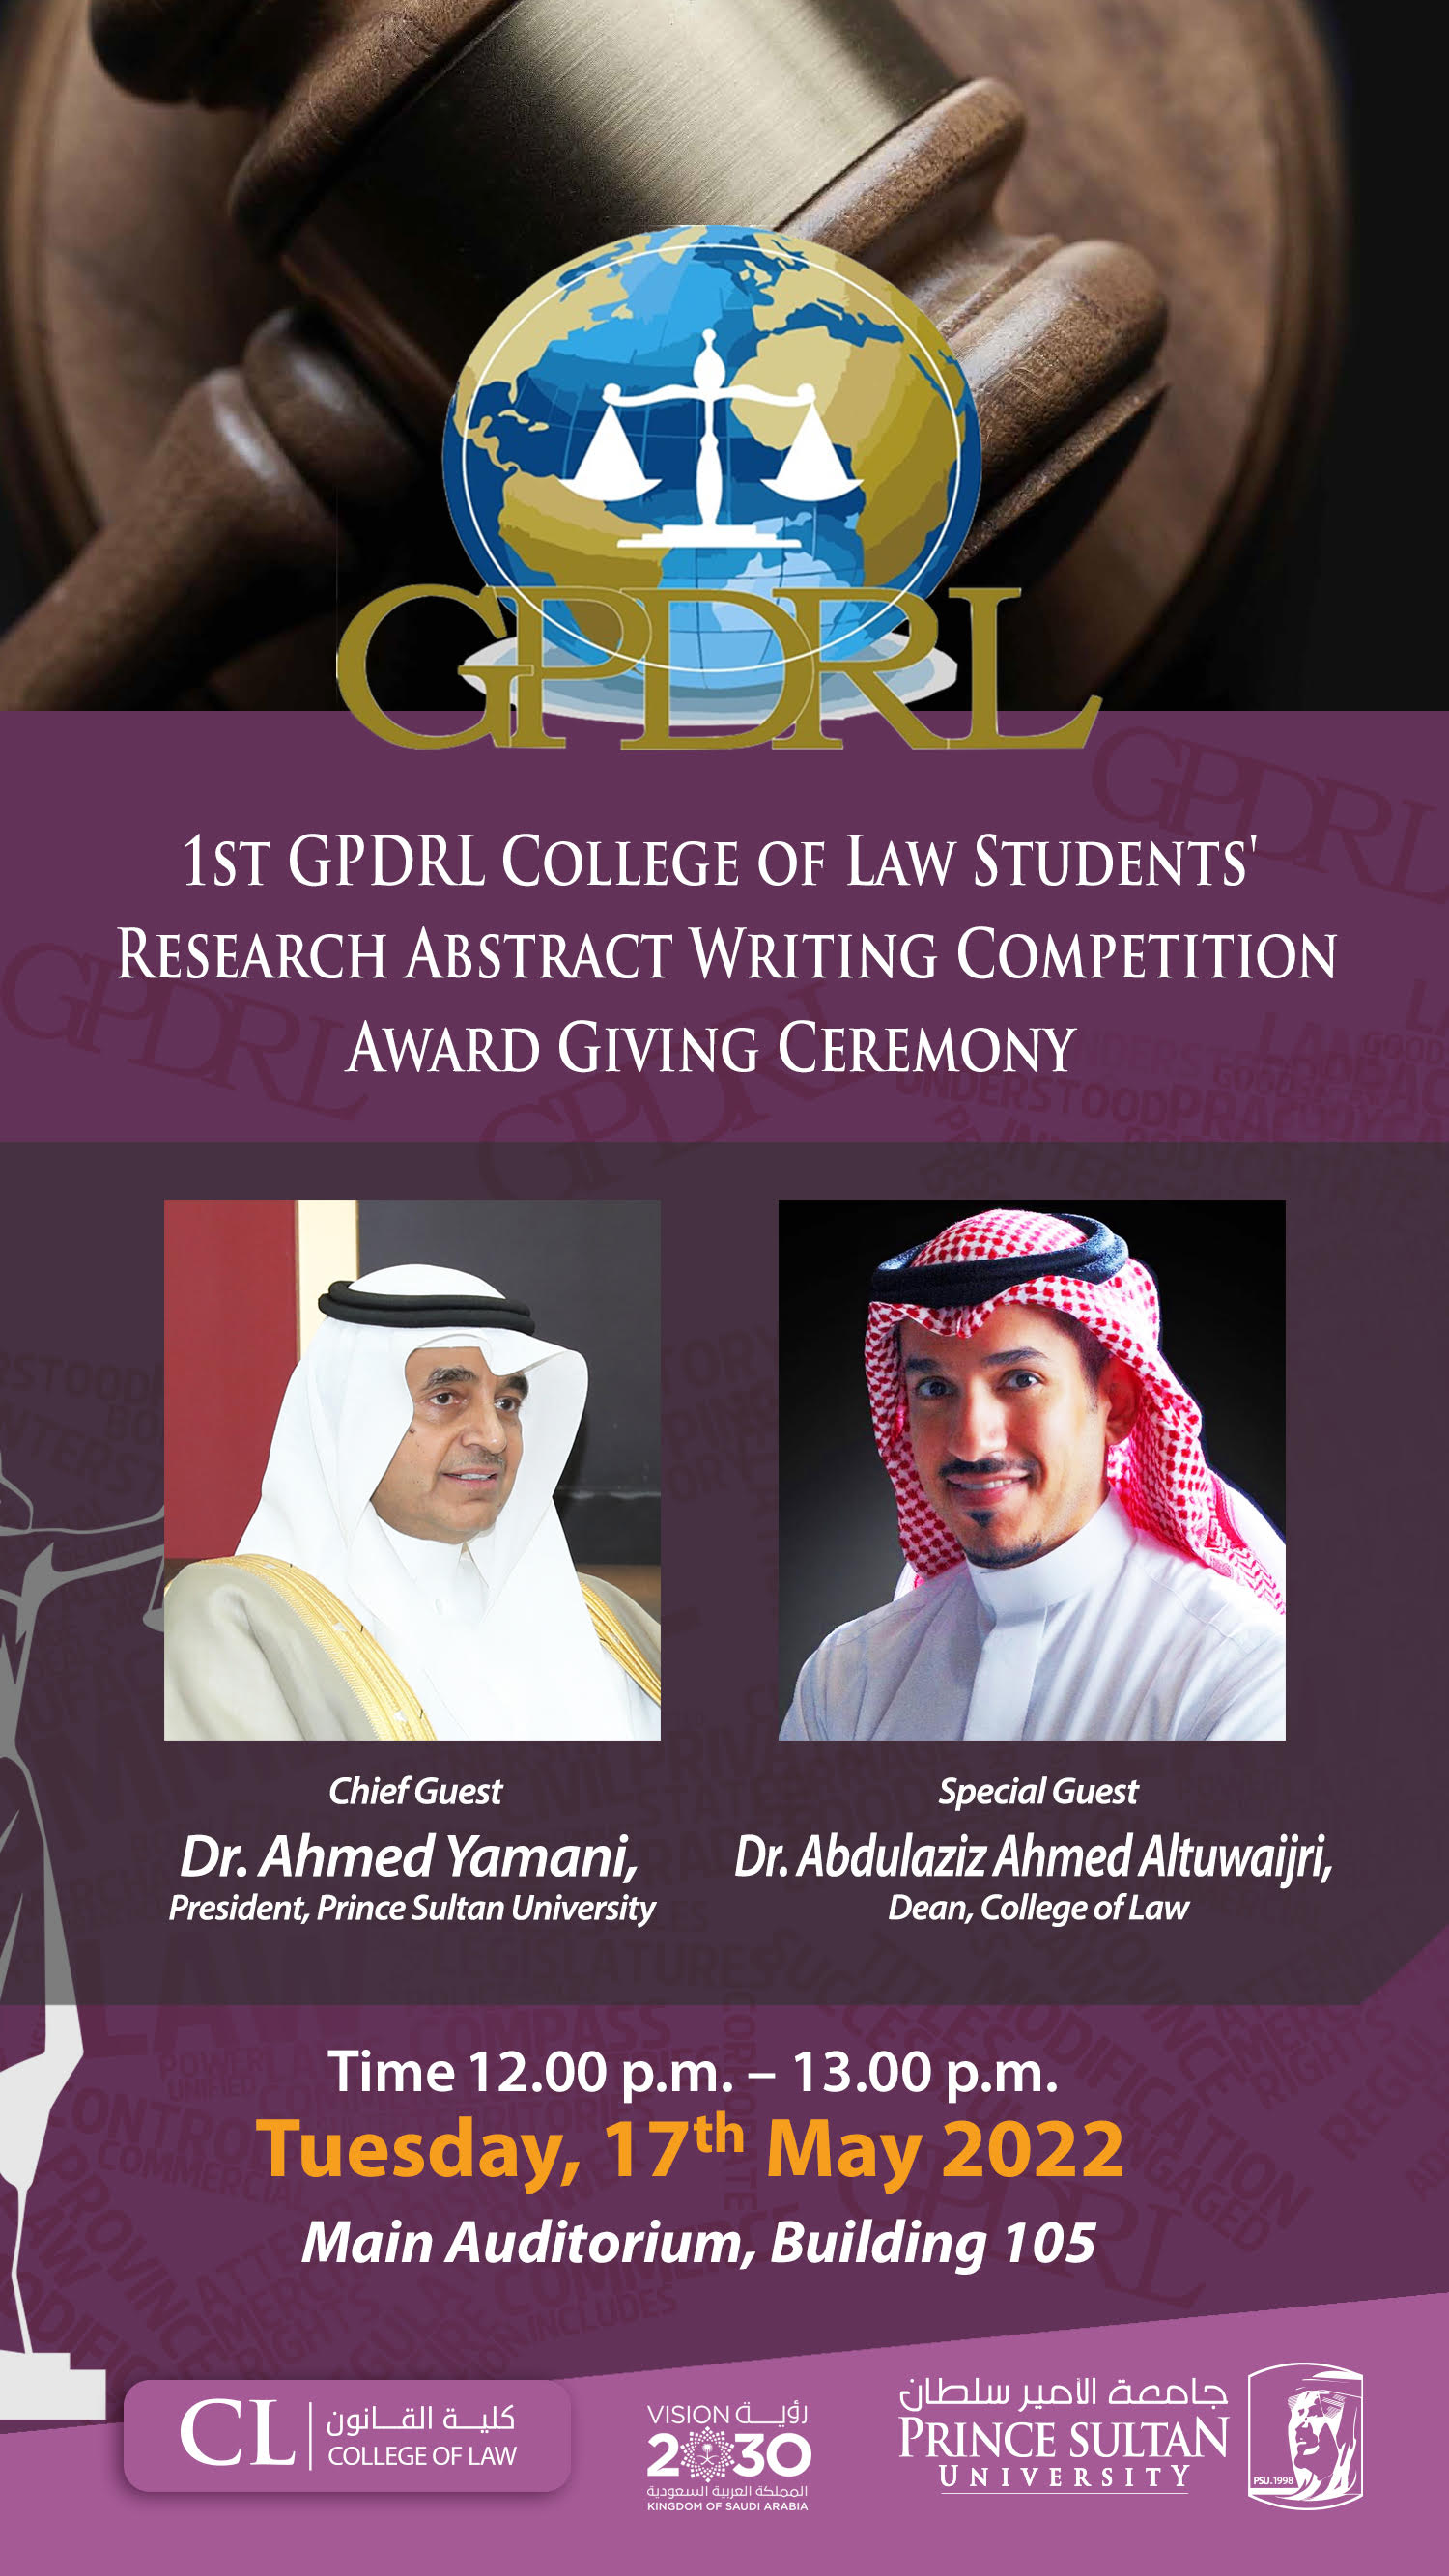 1st GPDRL College of Law Students' Research Abstract Competition Award Giving Ceremony